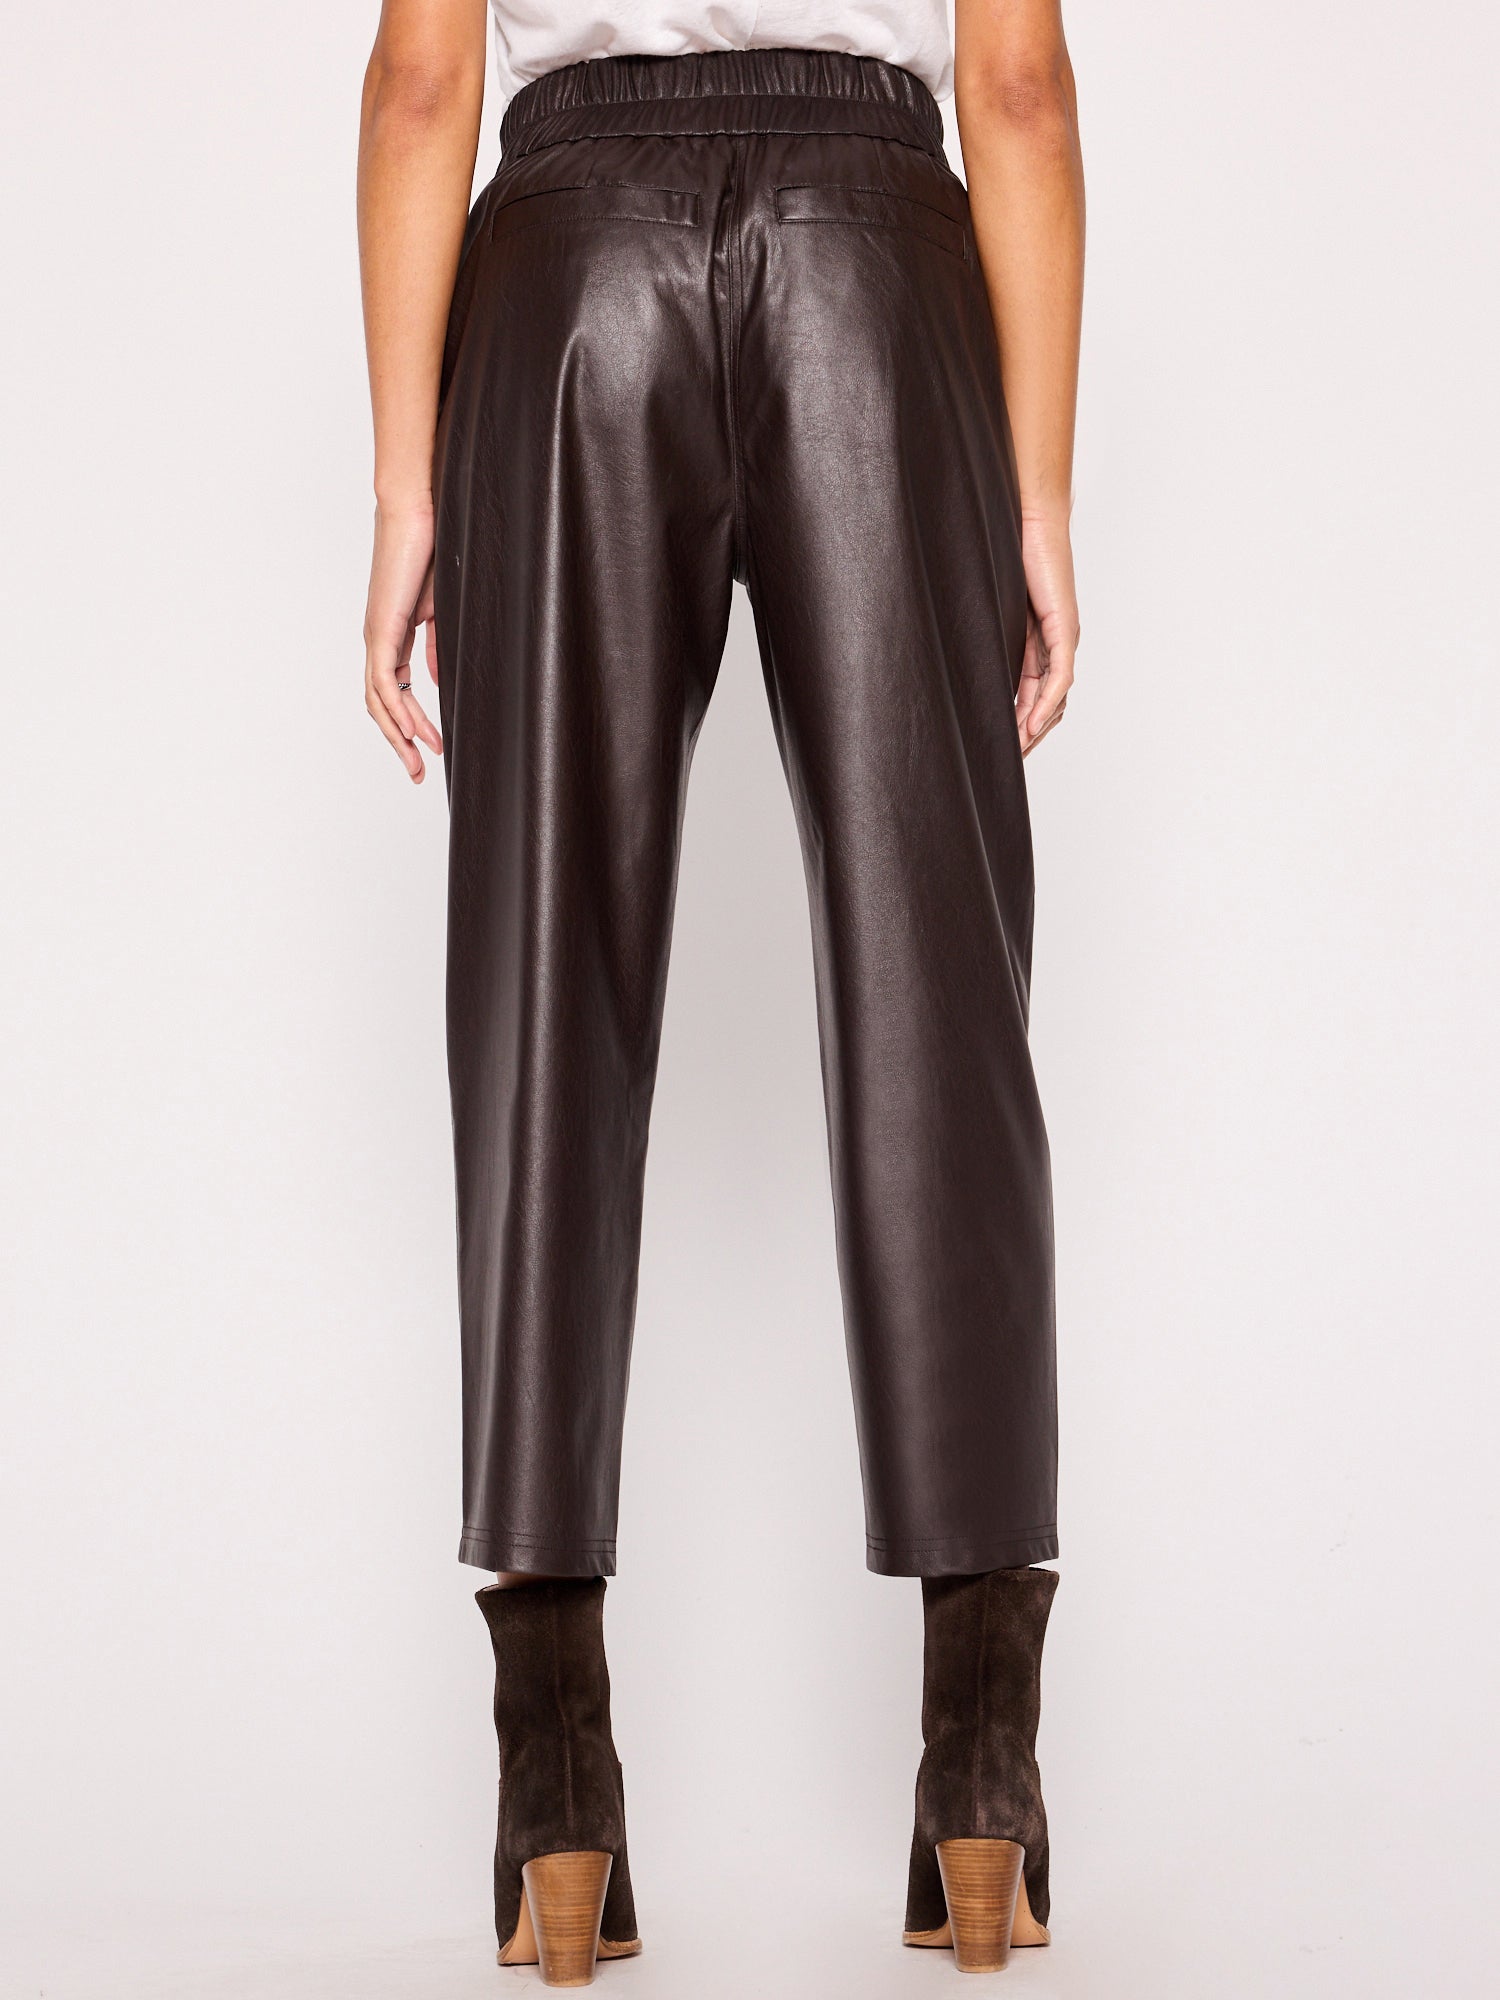 Fiera brown vegan leather cropped pant back view